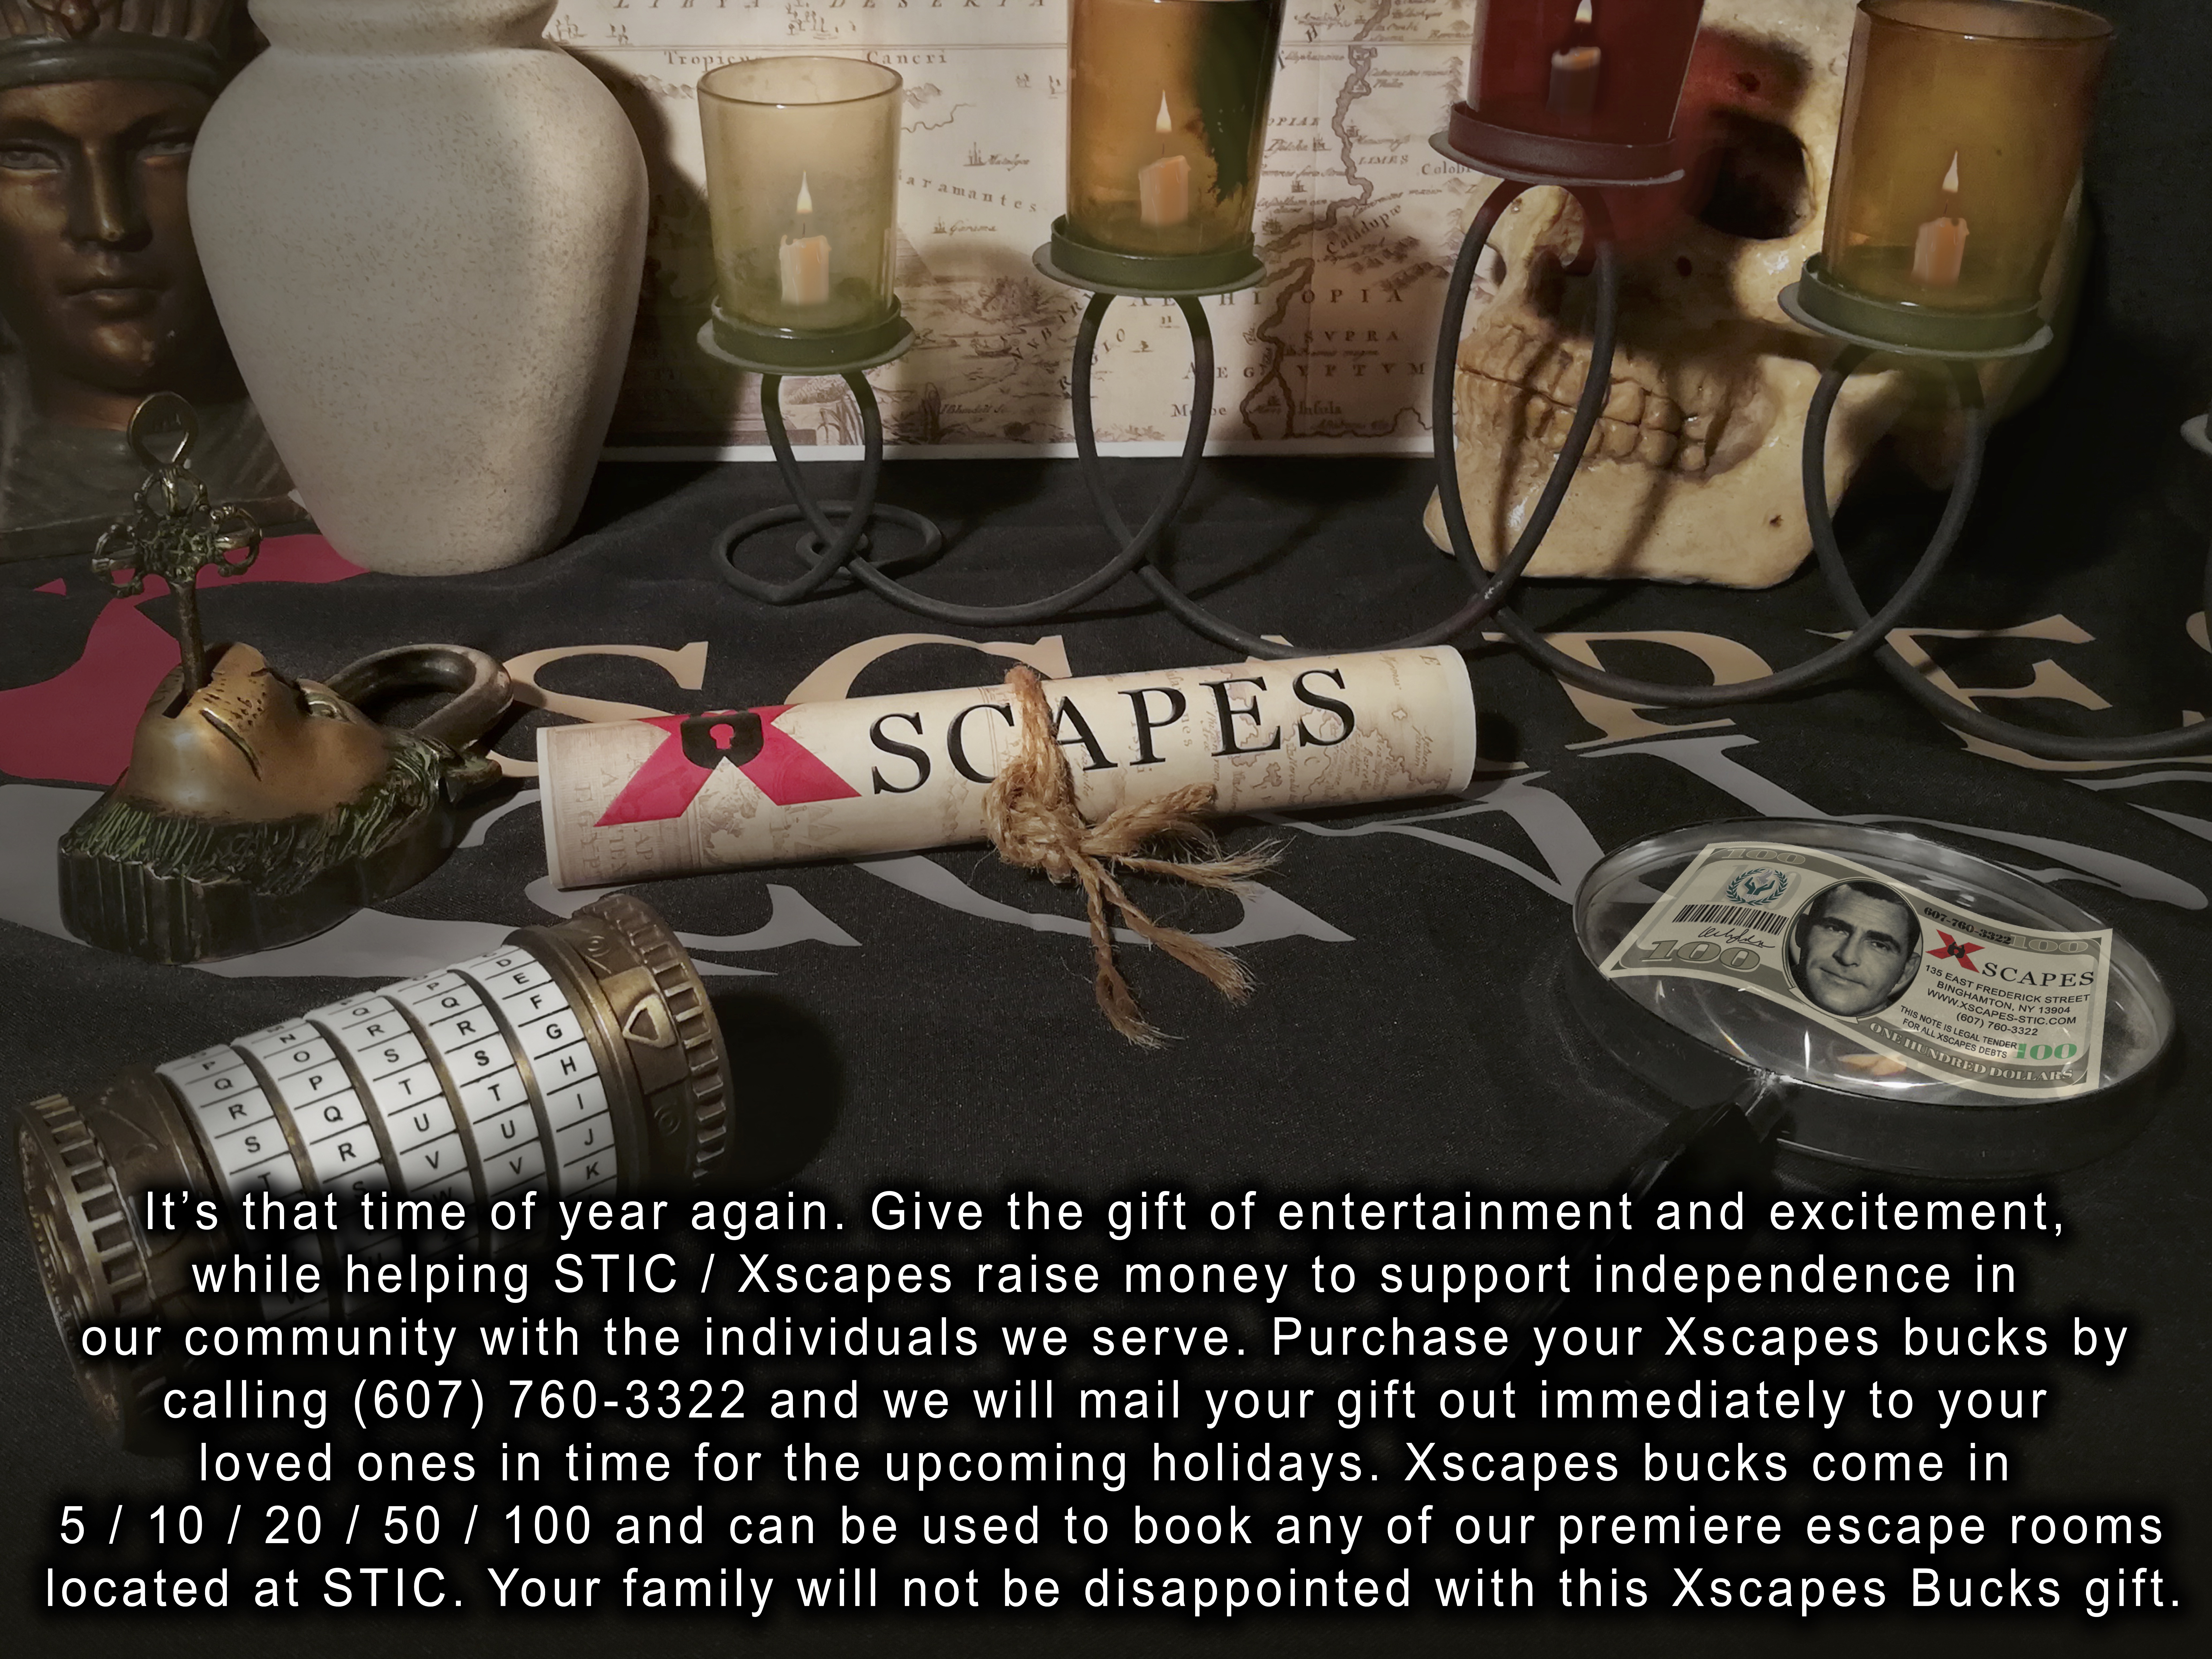 Xscapes bucks promo with picture of Xscapes dollars and escape room items in background, like clues / candles / 5 letter cryptex to solve and open. 